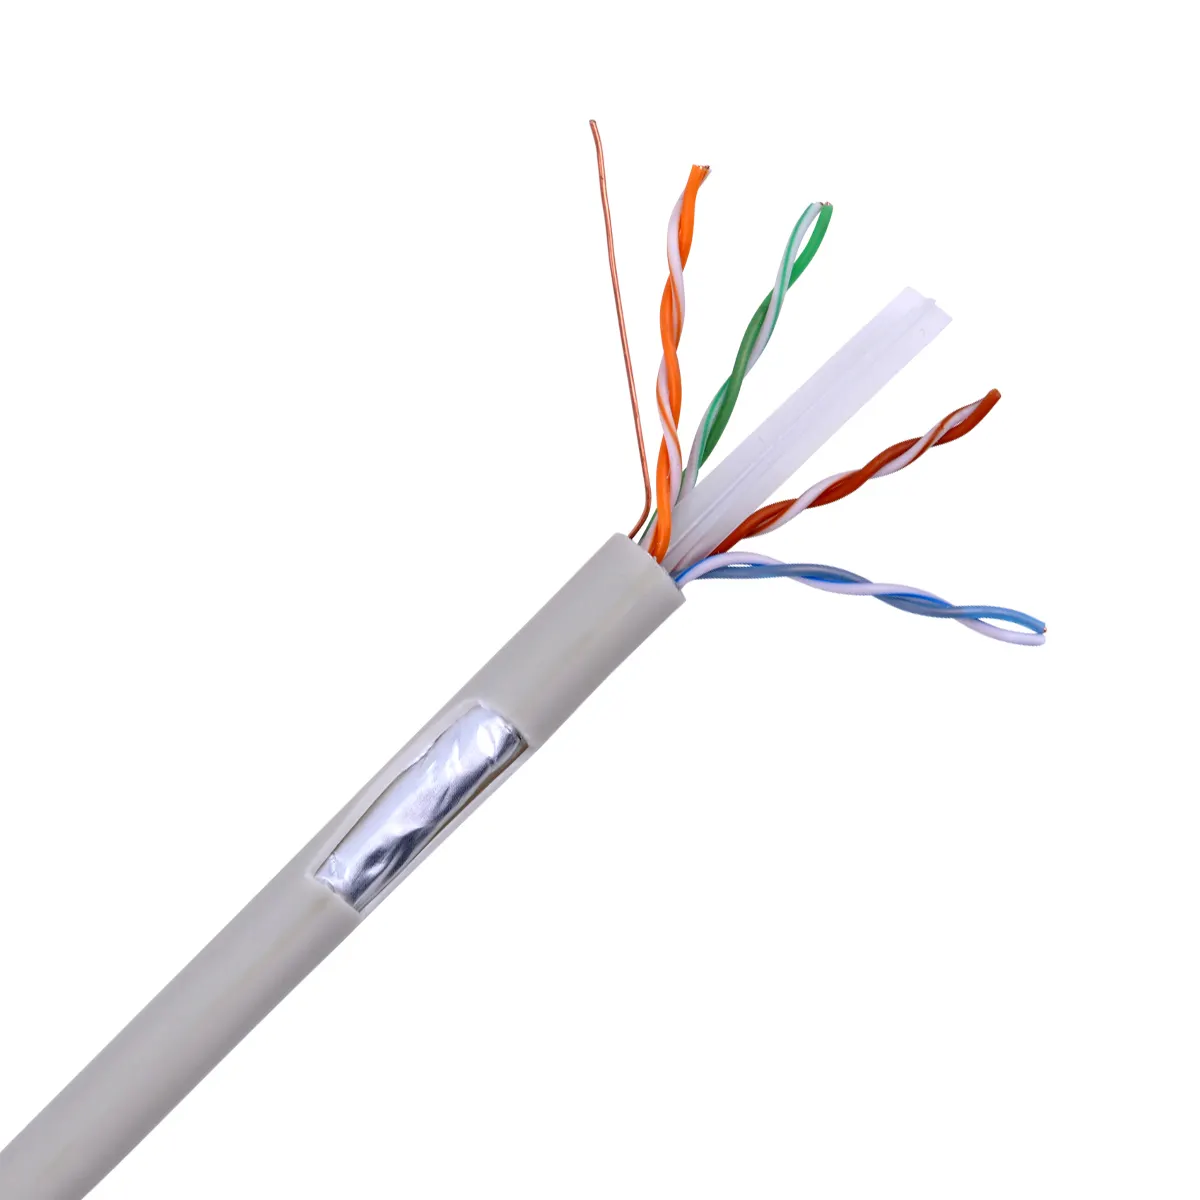 1000Ft 305m OEM Network Ethernet Cat 6e Cat6 Cable Price Cable Network FTP UTP Cat 6 Cat6e Cat6